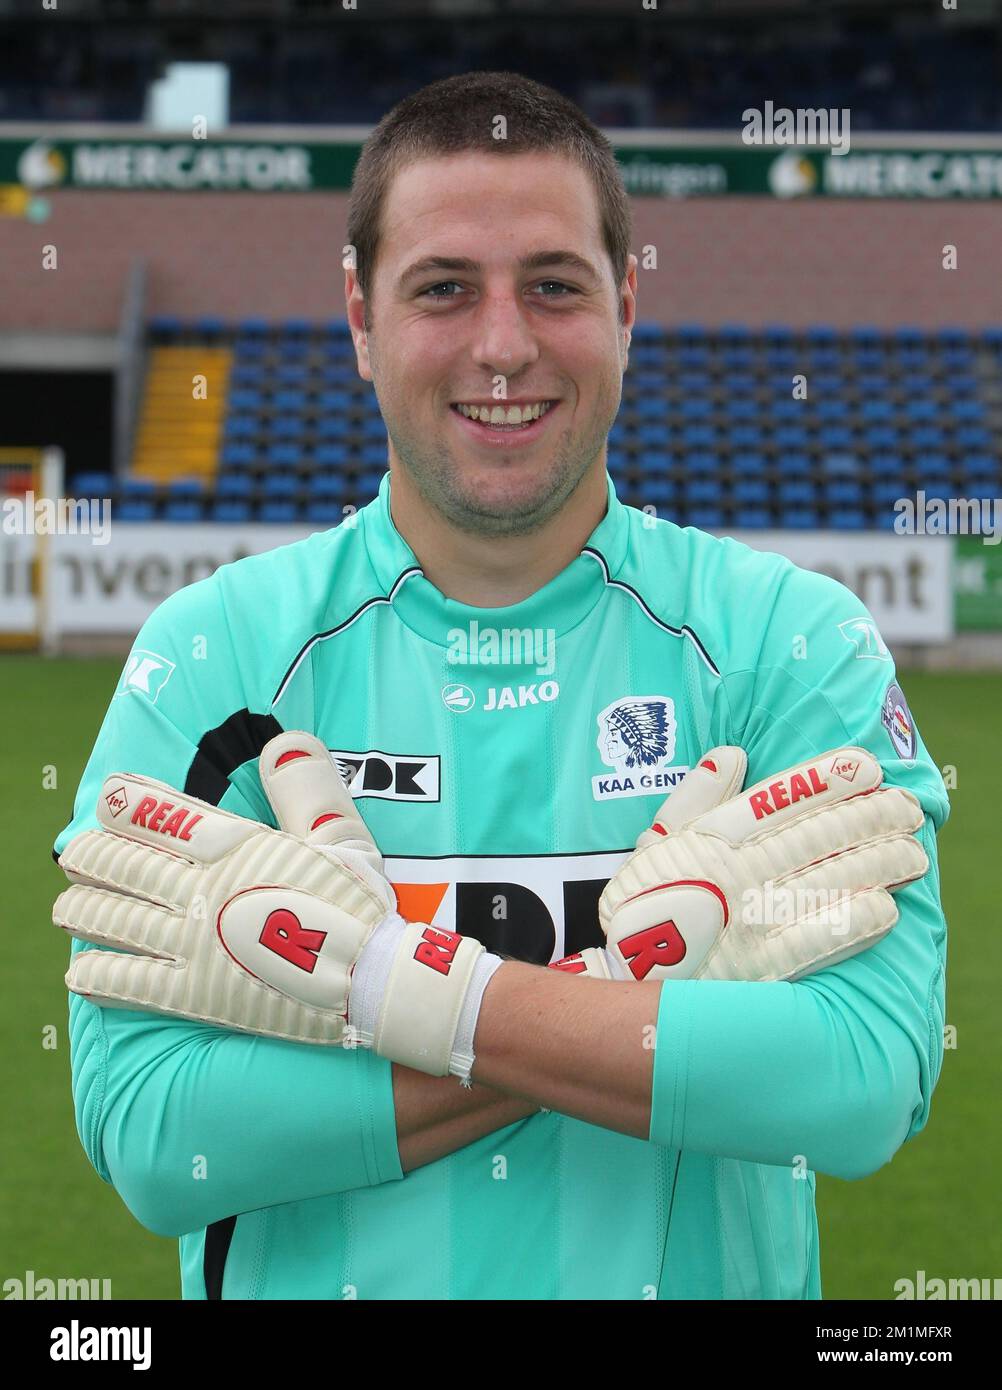 20110717 - GENT, BELGIUM: Gent's goalkeeper Frank Boeckx of the 2011-2012 season team of Belgian first division soccer team KAA Gent pictured during the official team presentation and photoshoot, in Gent, Sunday 17 July 2011. BELGA PHOTO MICHEL KRAKOWSKI Stock Photo